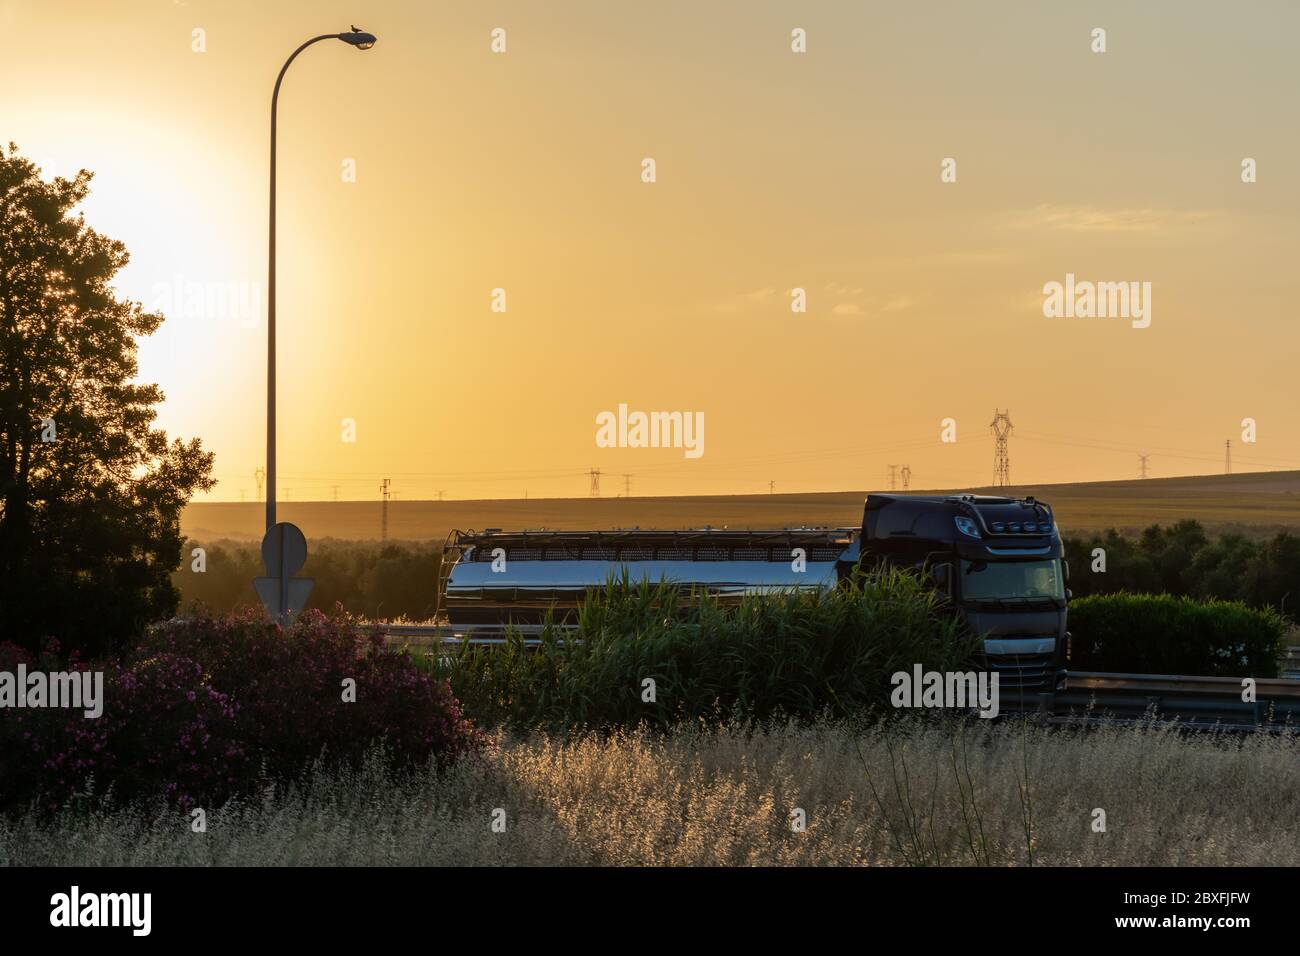 Steel tanker truck driving on the highway with a sunset sky Stock Photo